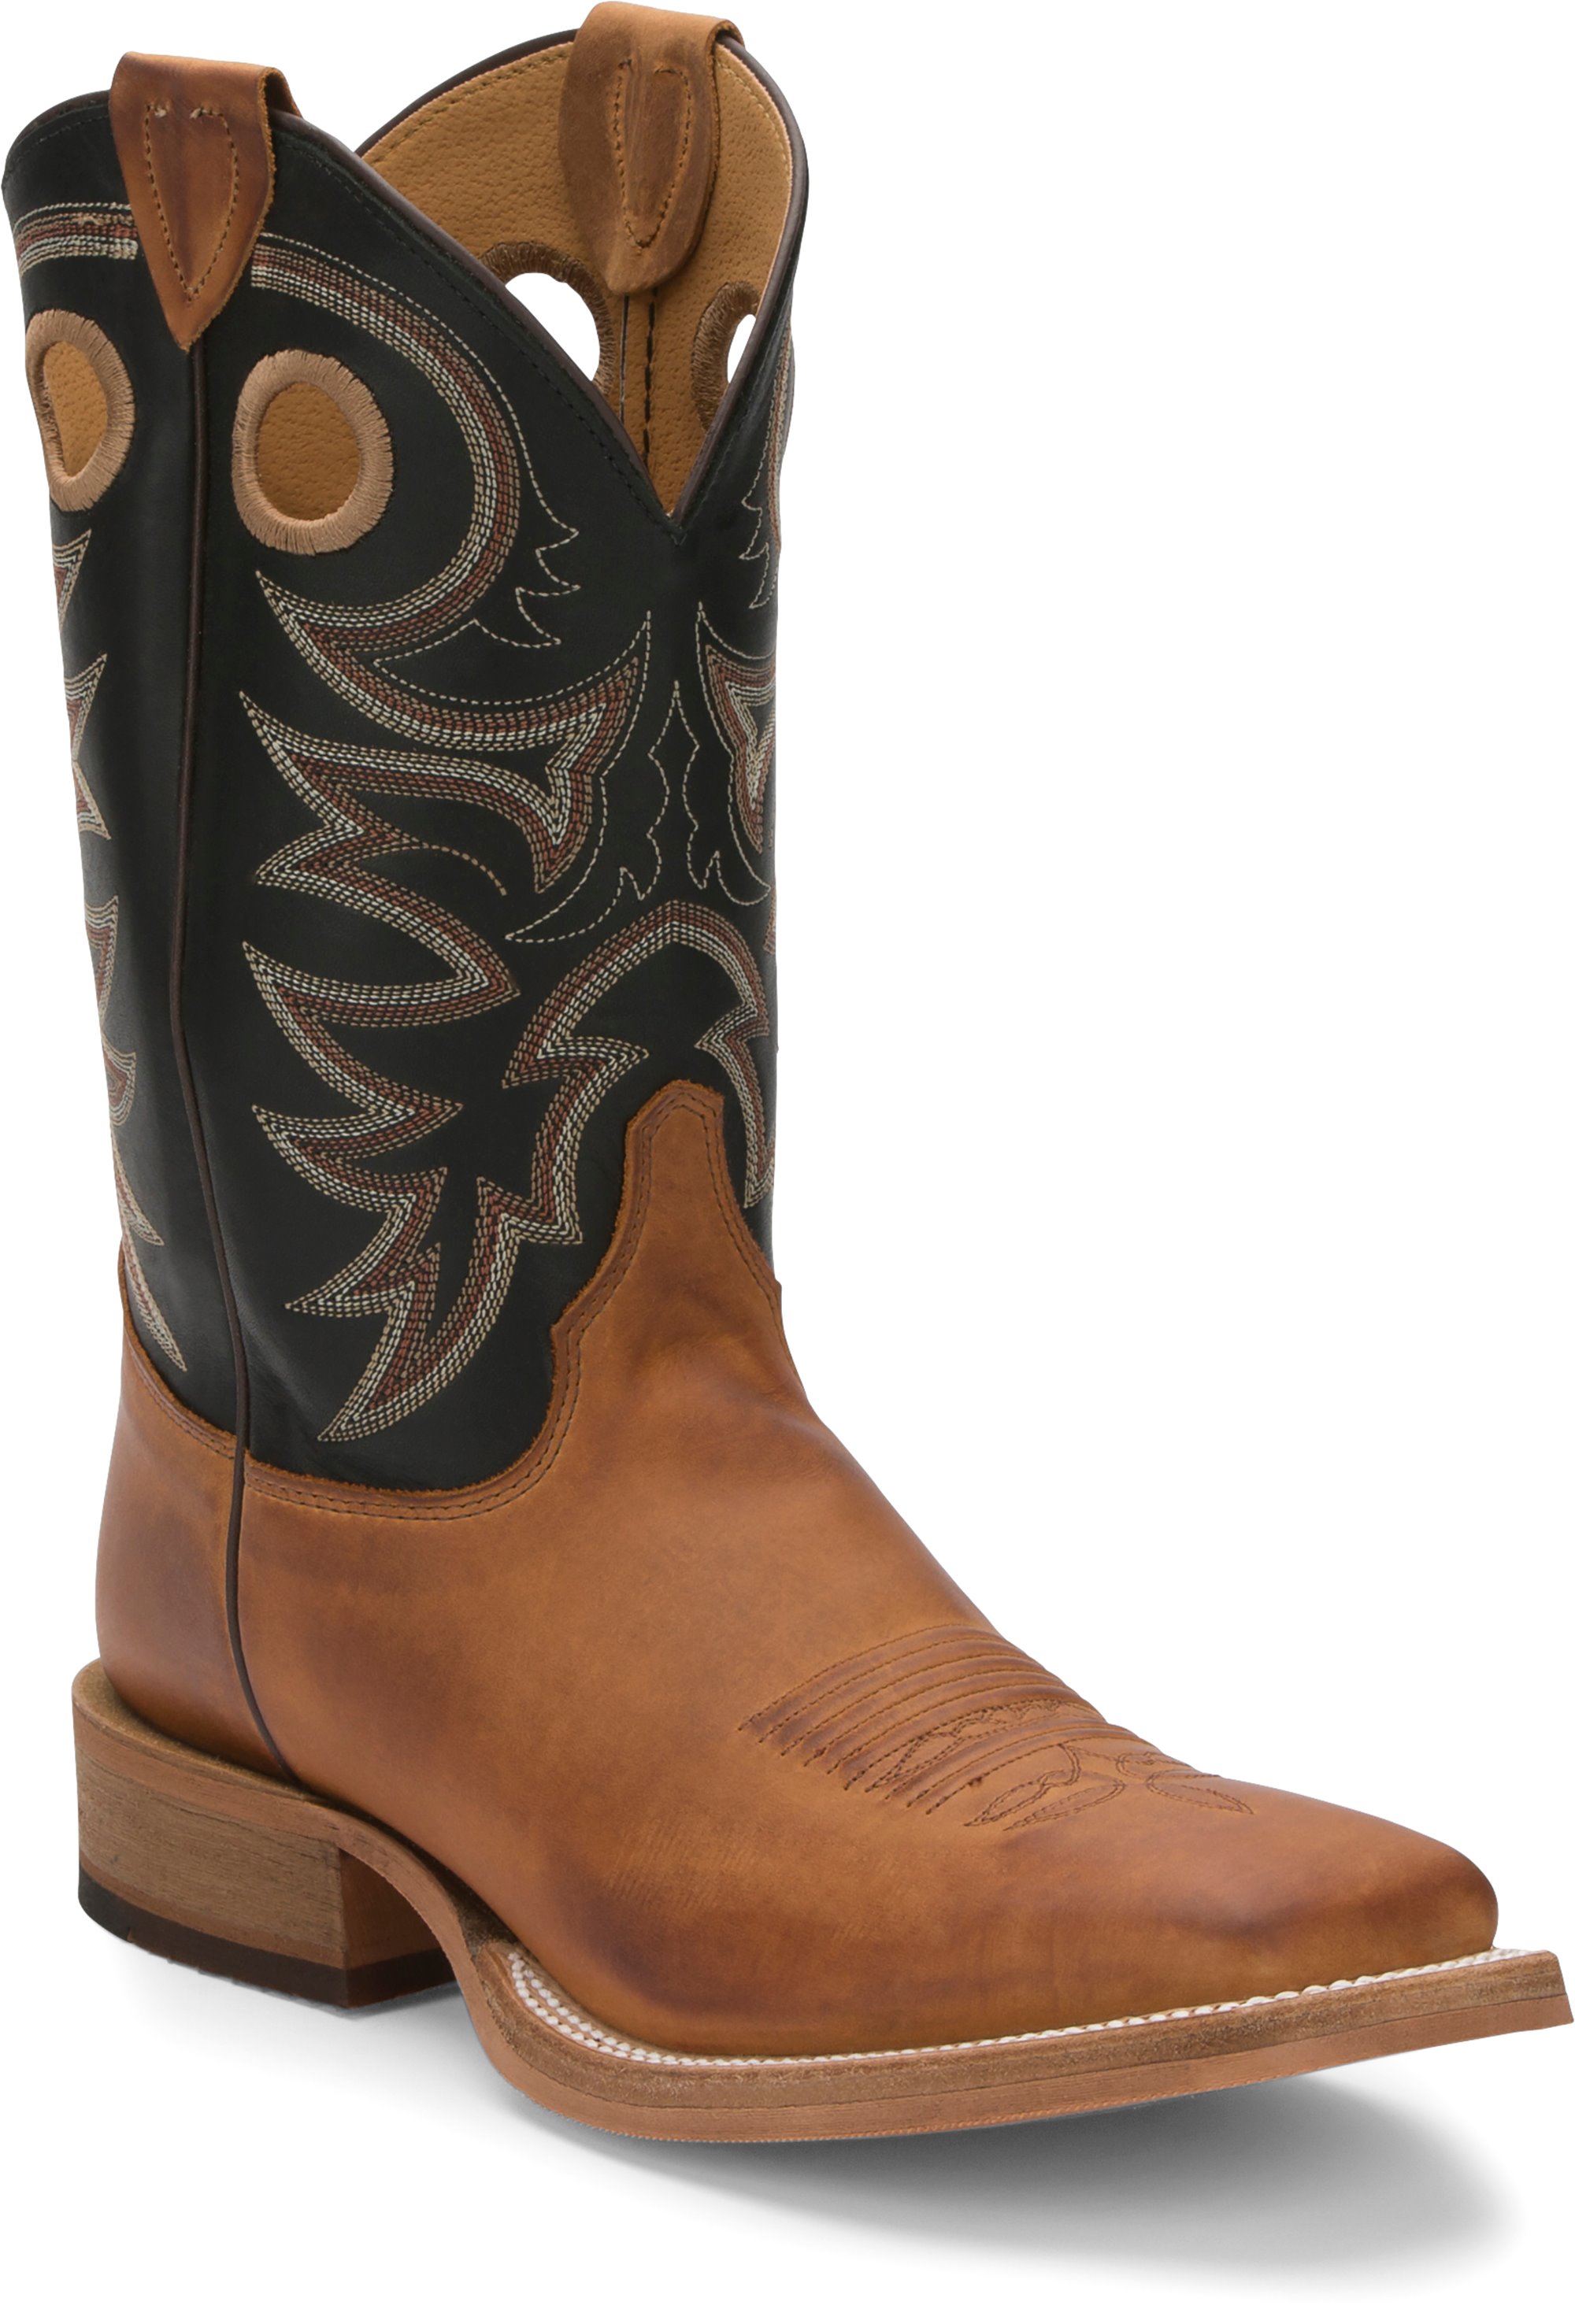 justin boots price